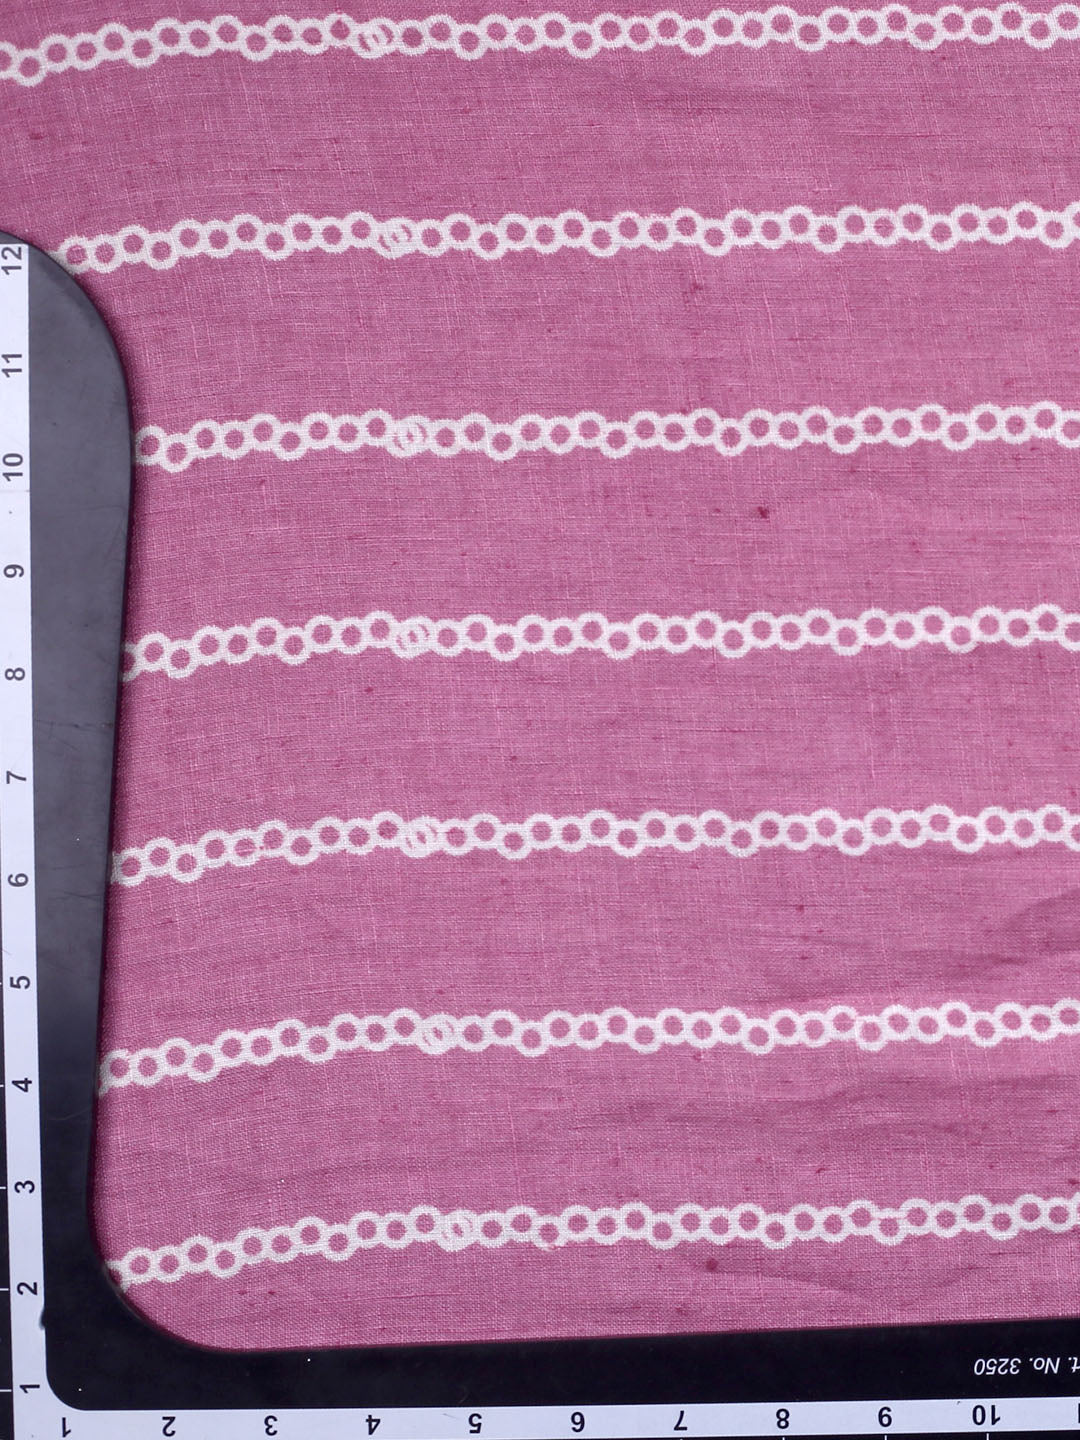 Dusty Pink Printed Pure Linen Fabric